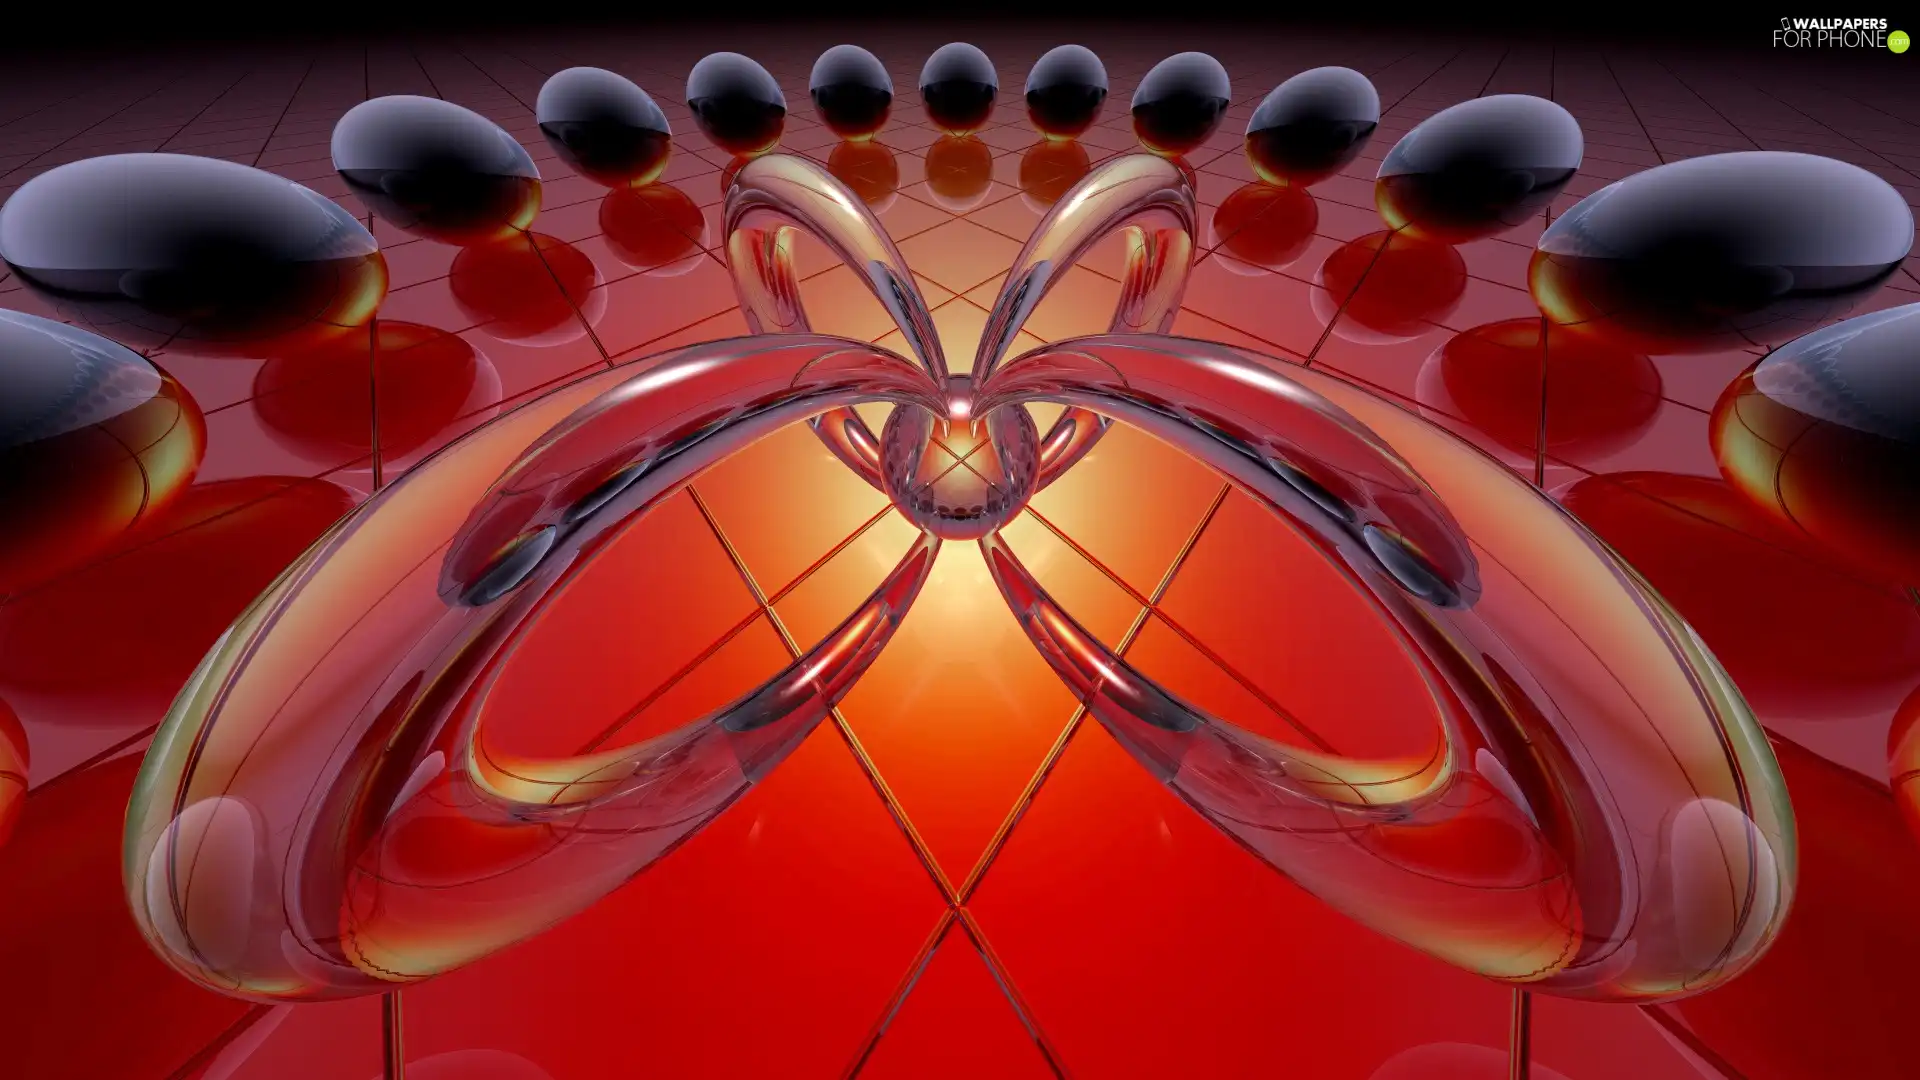 3D Graphics, abstraction, Rims